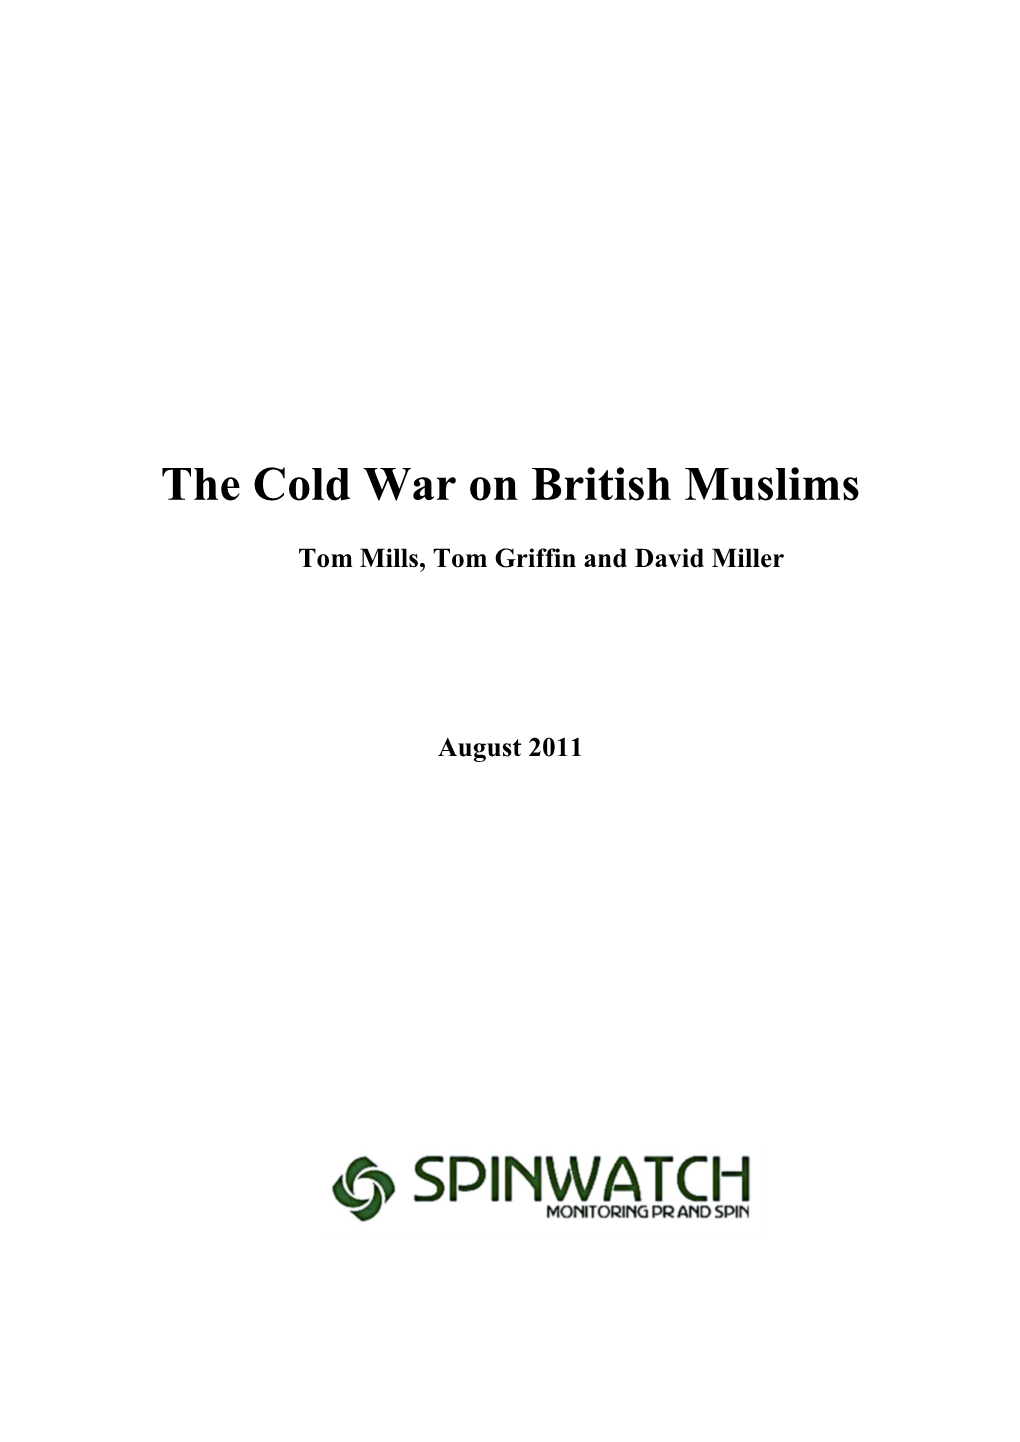 The Cold War on British Muslims